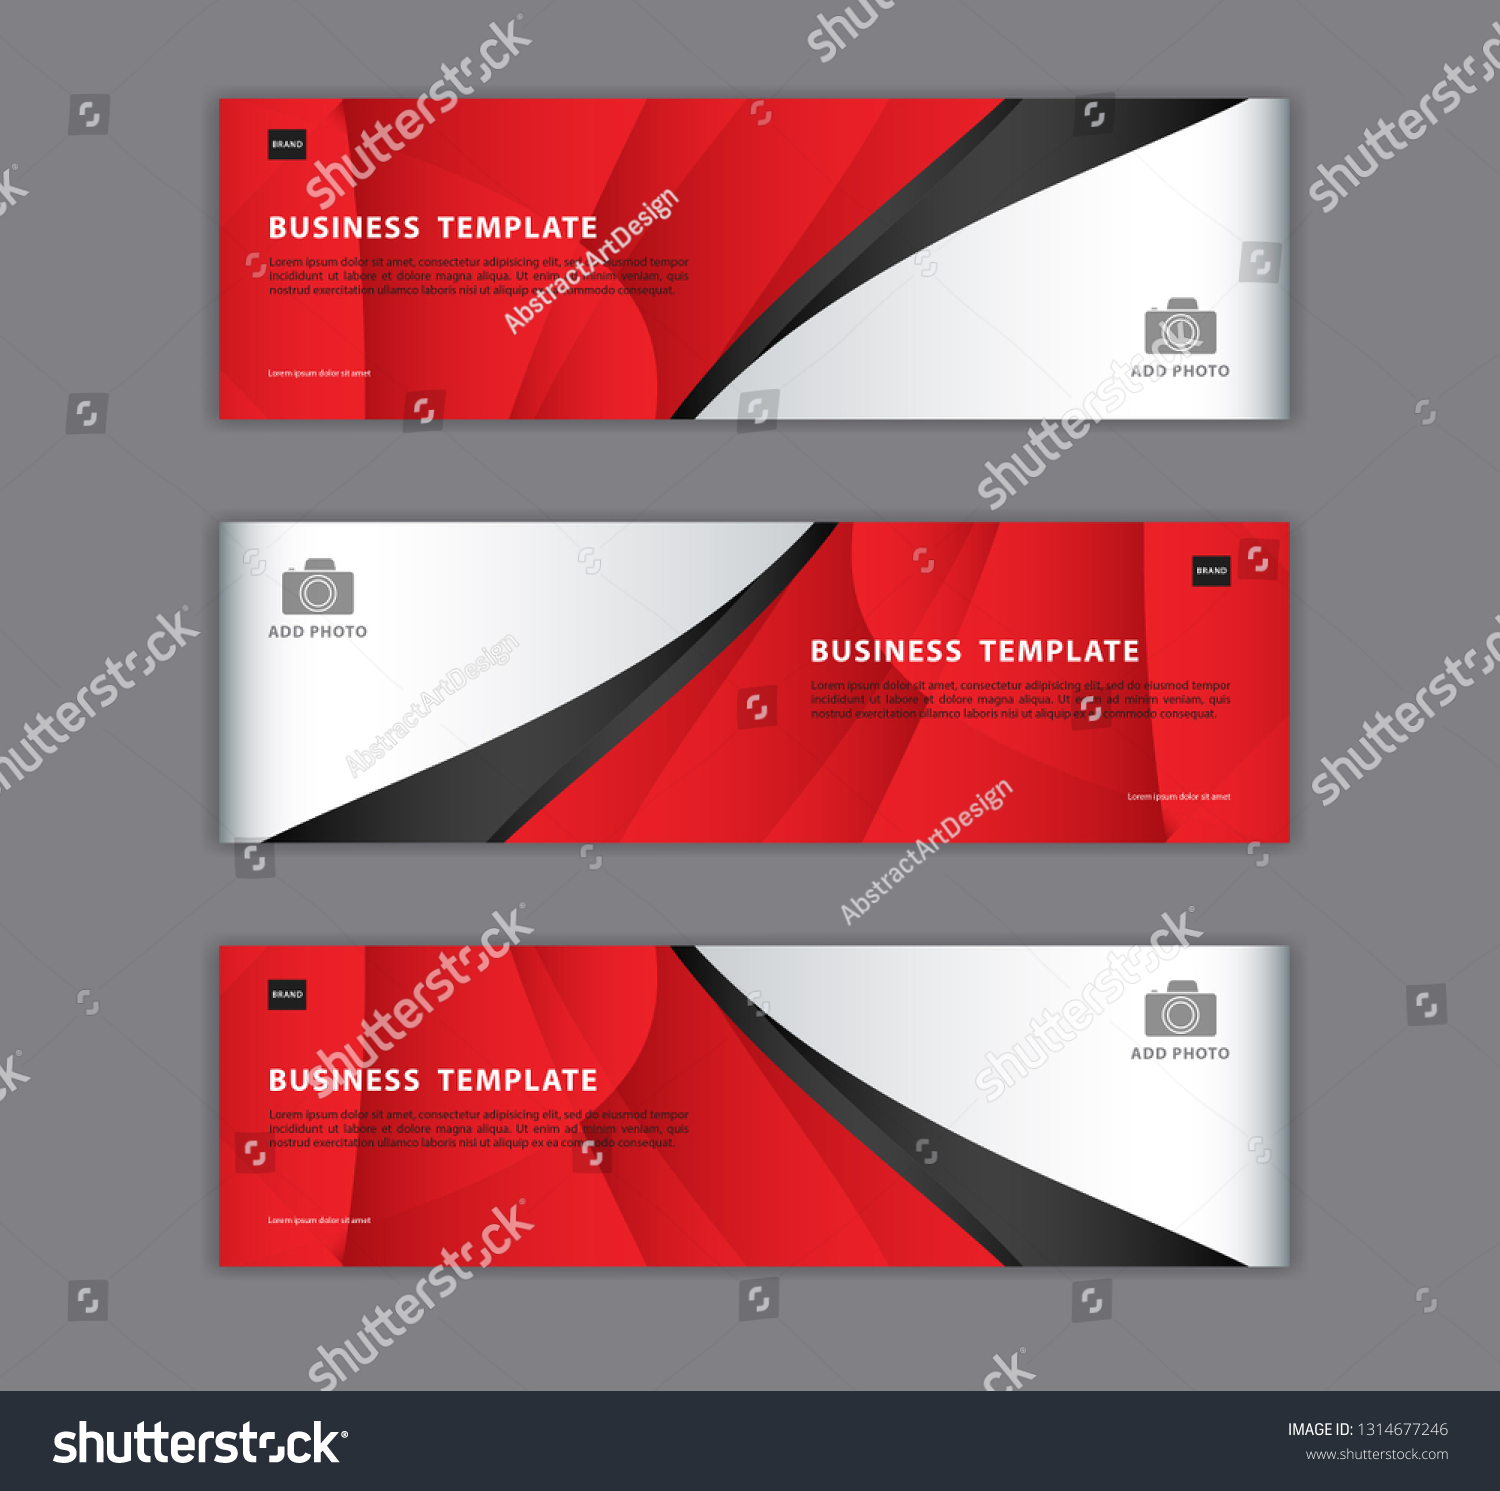 Red banner design template vector illustration, Geometric, polygonal Abstract background, texture, advertisement layout. web page. header for website. Graphic for billboard, gift voucher, card.  #1314677246